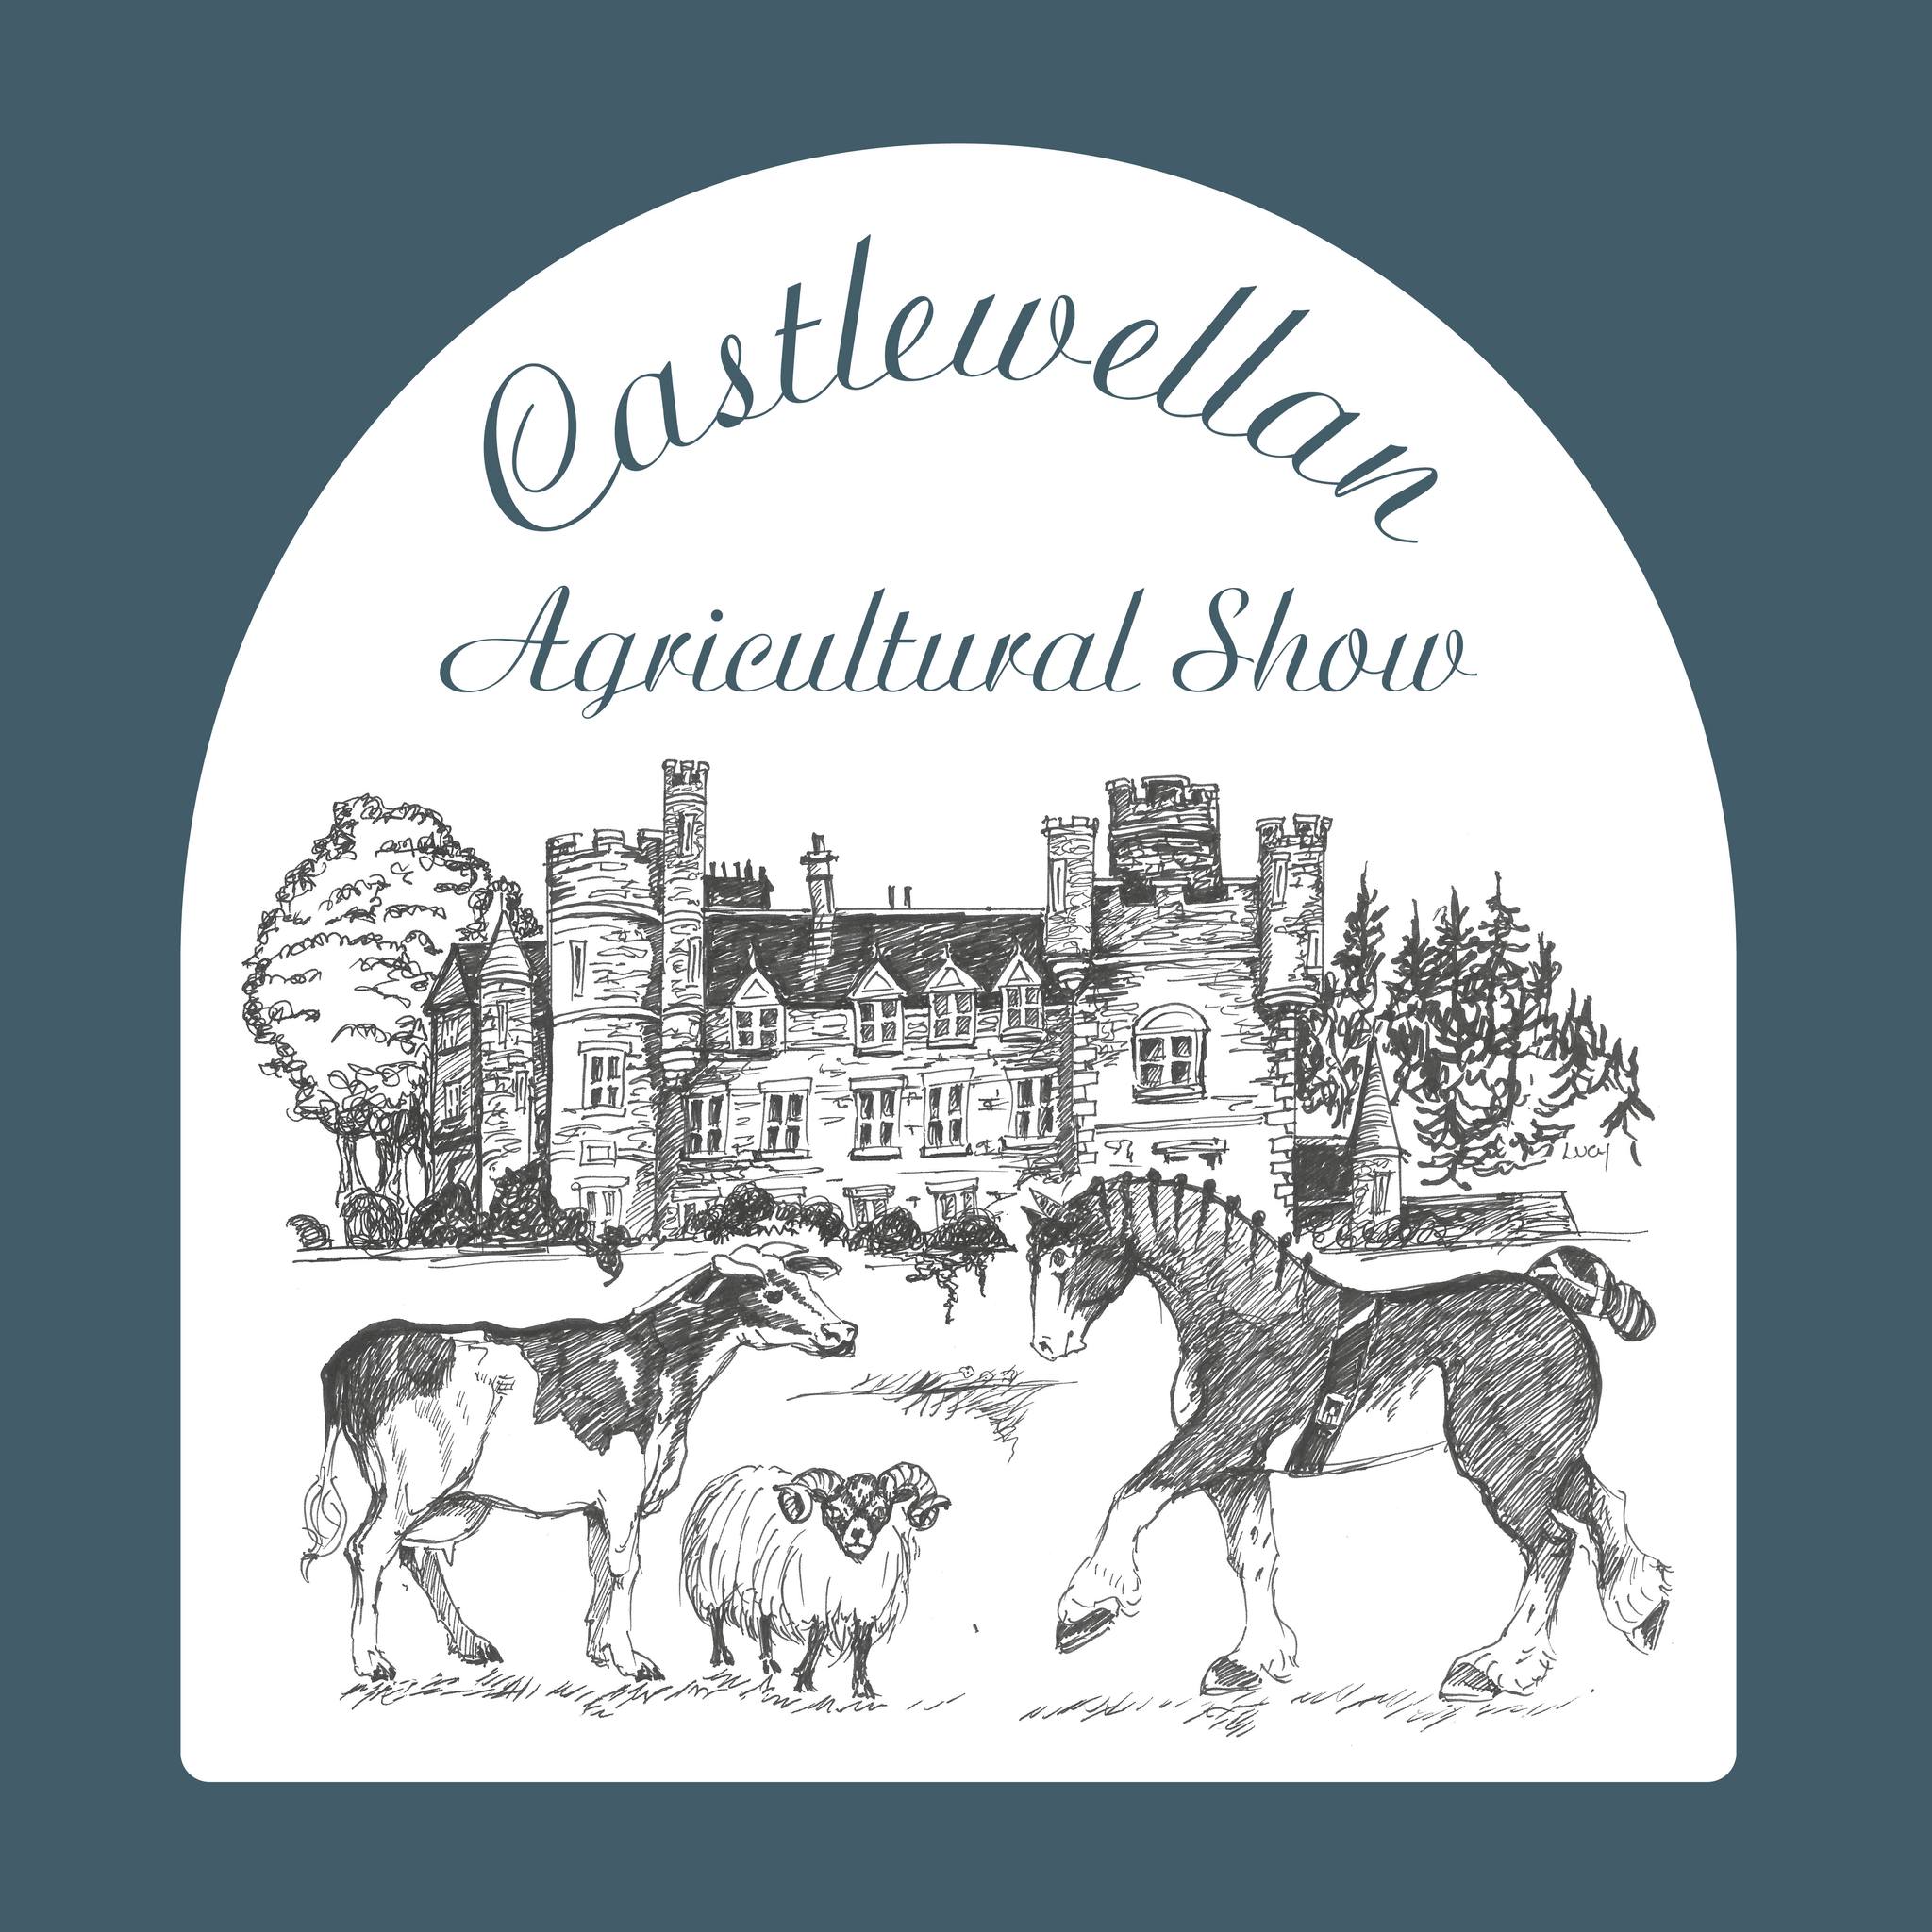 Castlewellan Agricultural Show Featured Image